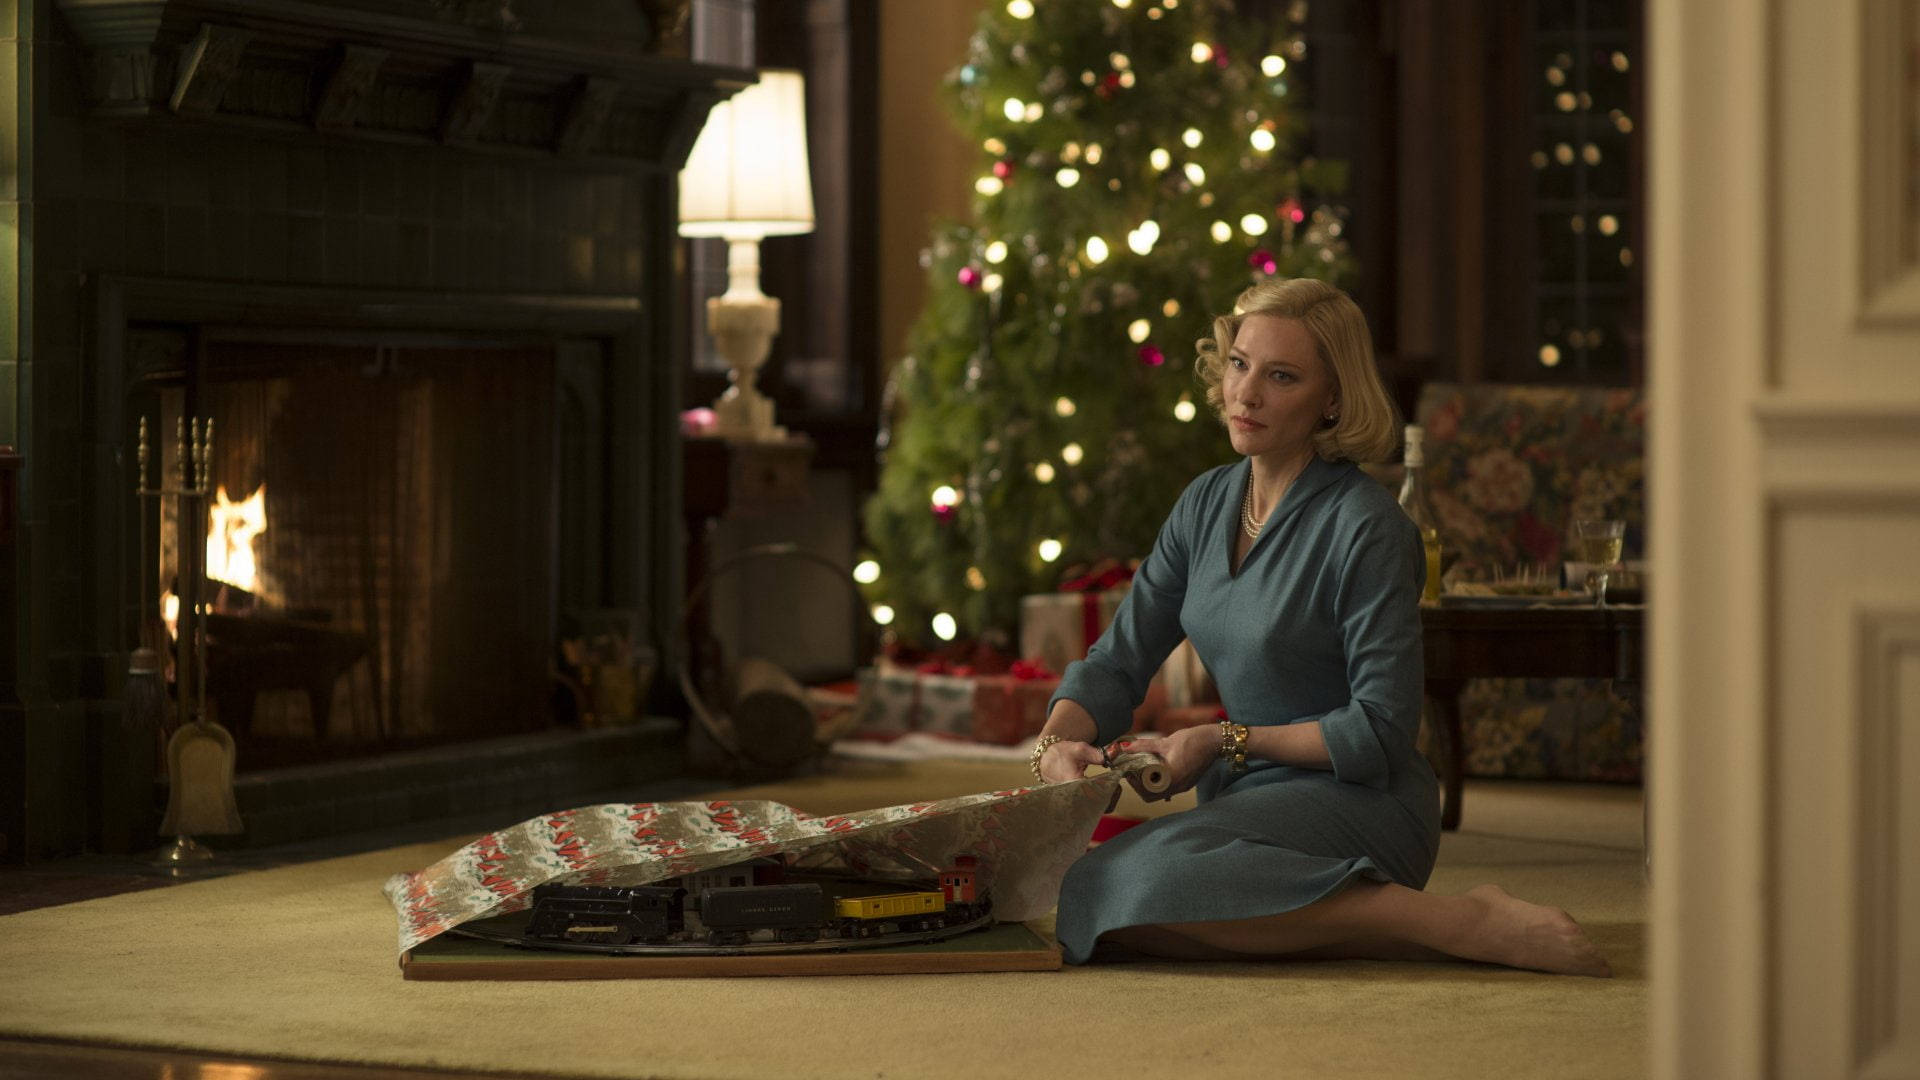 Cate Blanchett As Carol With Gifts